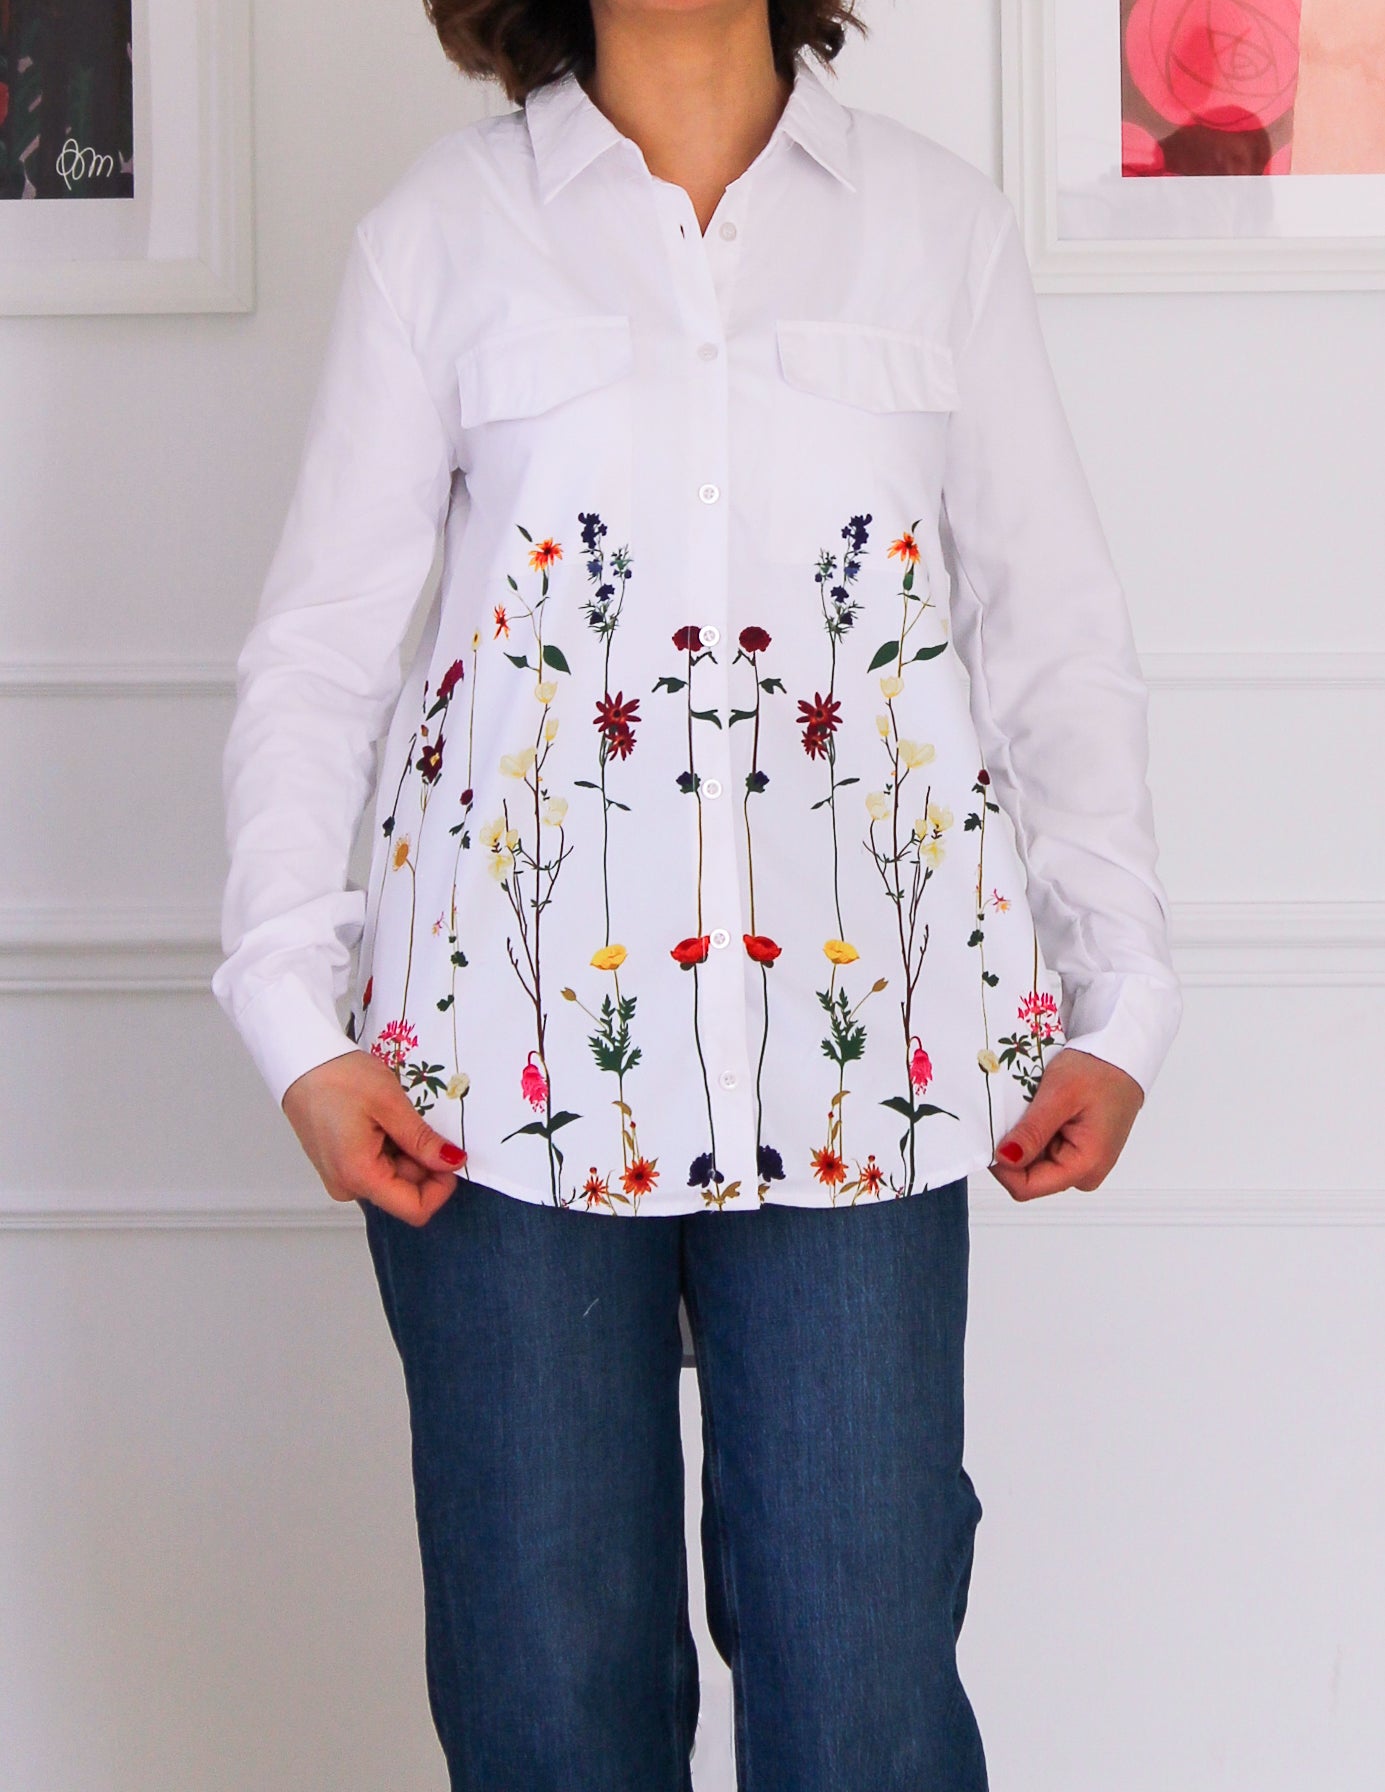 White shirt decorated with floral patterns